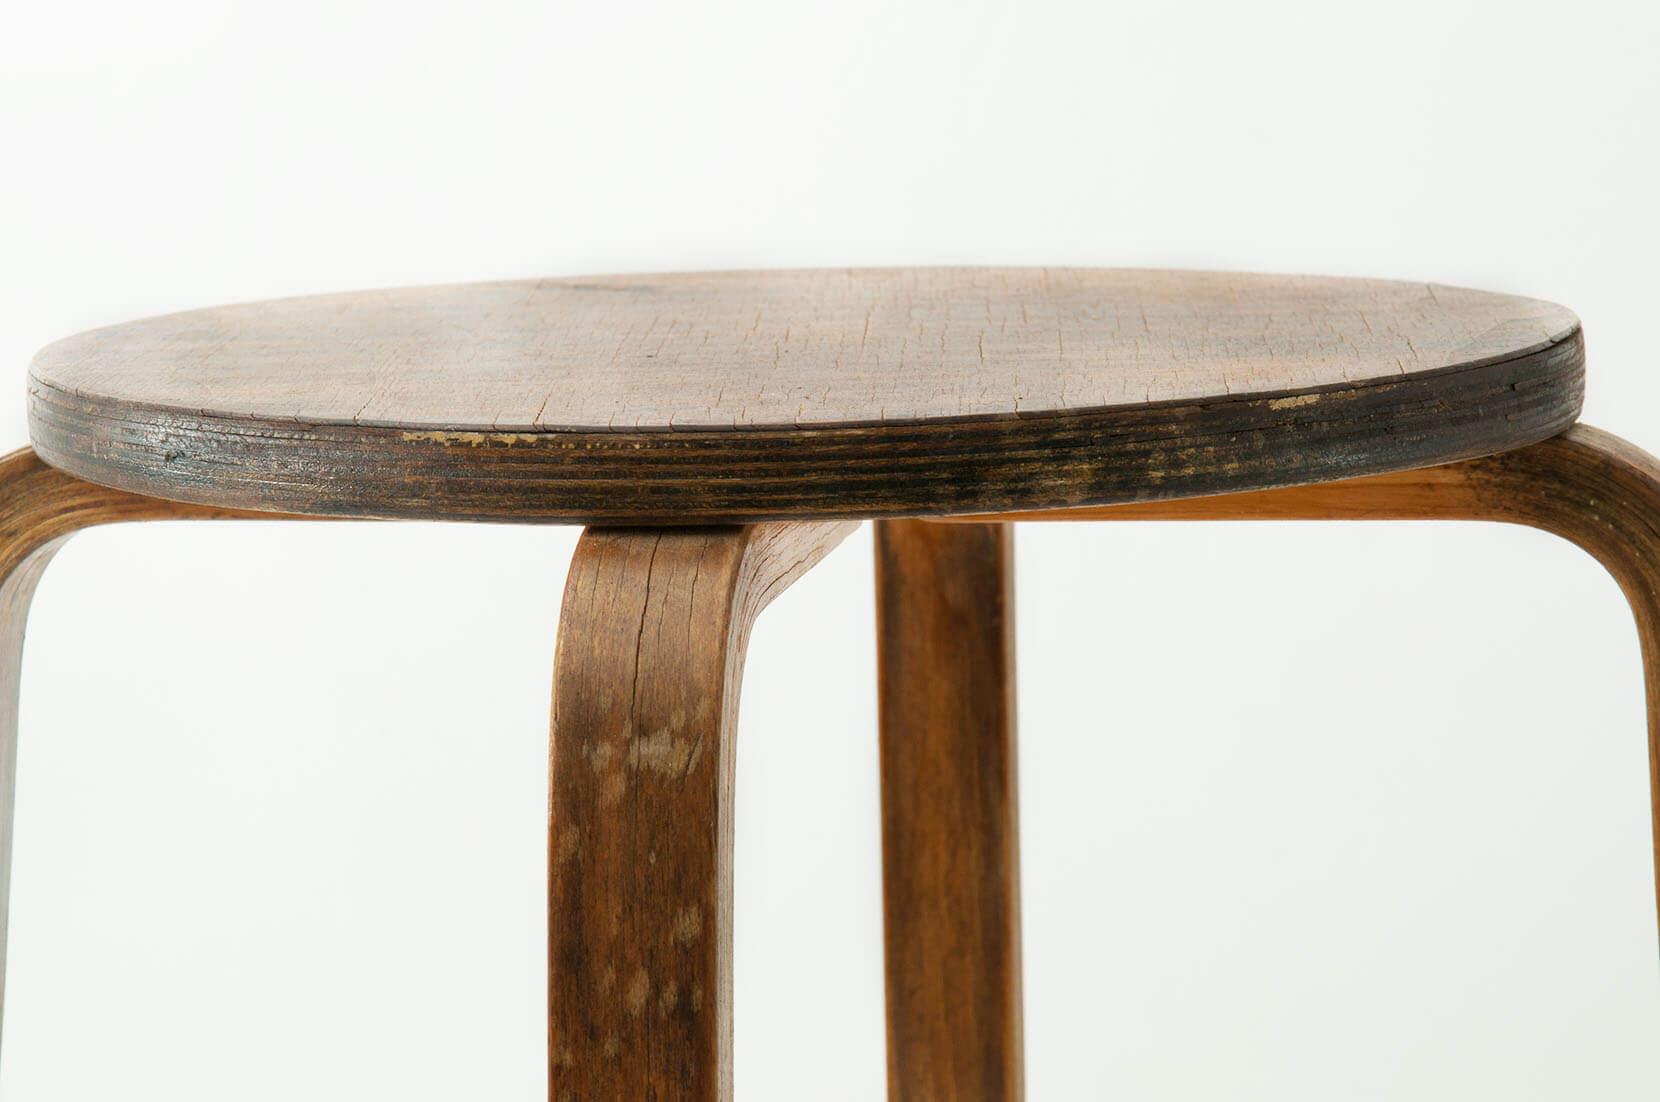 This Stool is atributed to Alvar Aalto, for Artek. This creation is around 1960 in Finland.
The Wear is consistent with age, and gives a great patina to the item. This is a minimalist design as the scandinavian designers used to do.
THe model is